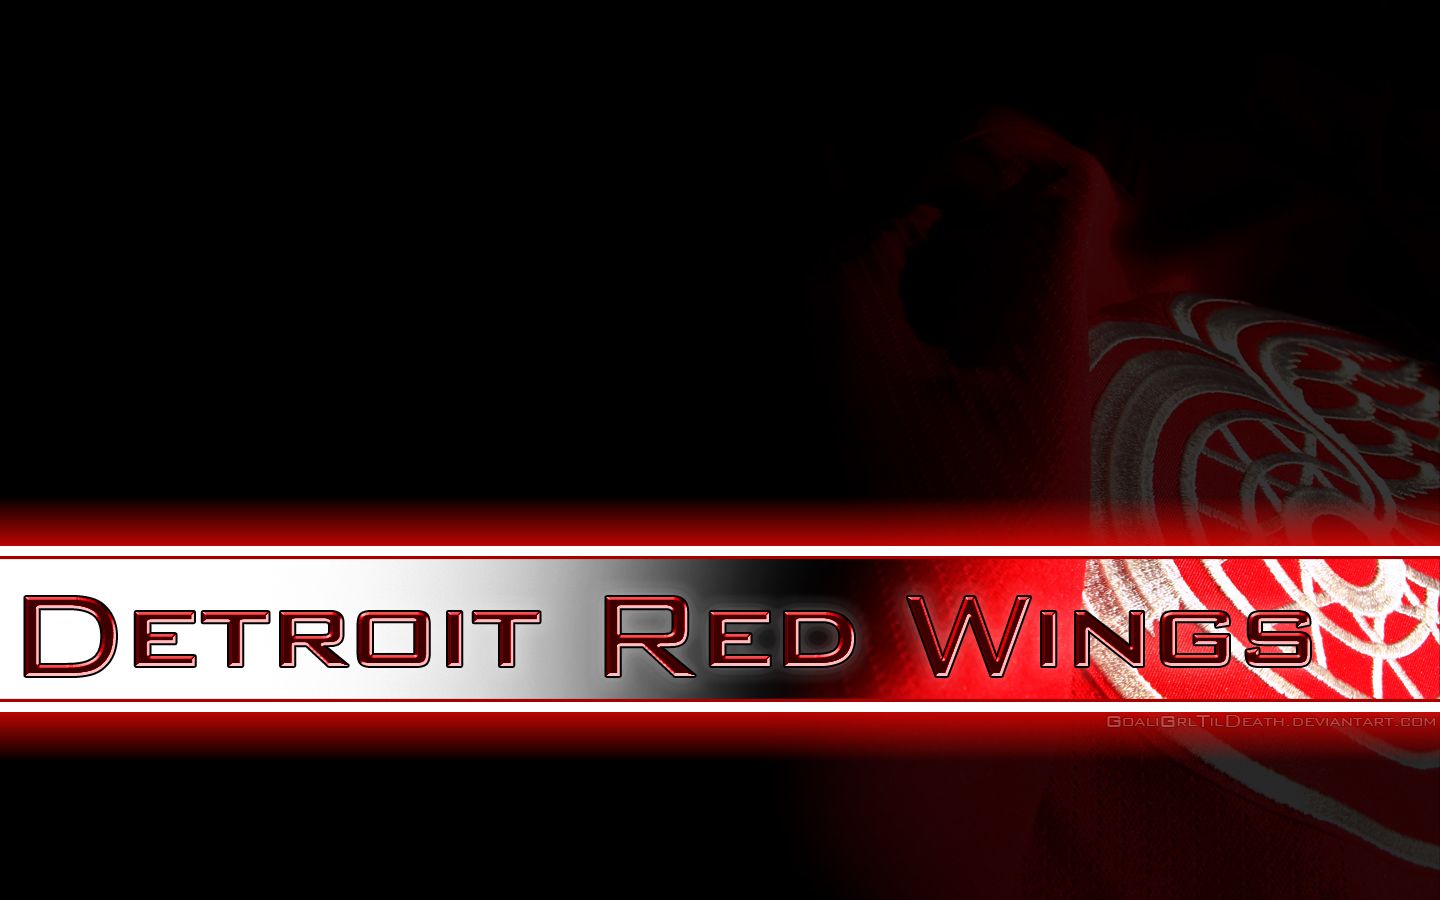 Detroit Red Wings Wallpaper. Red